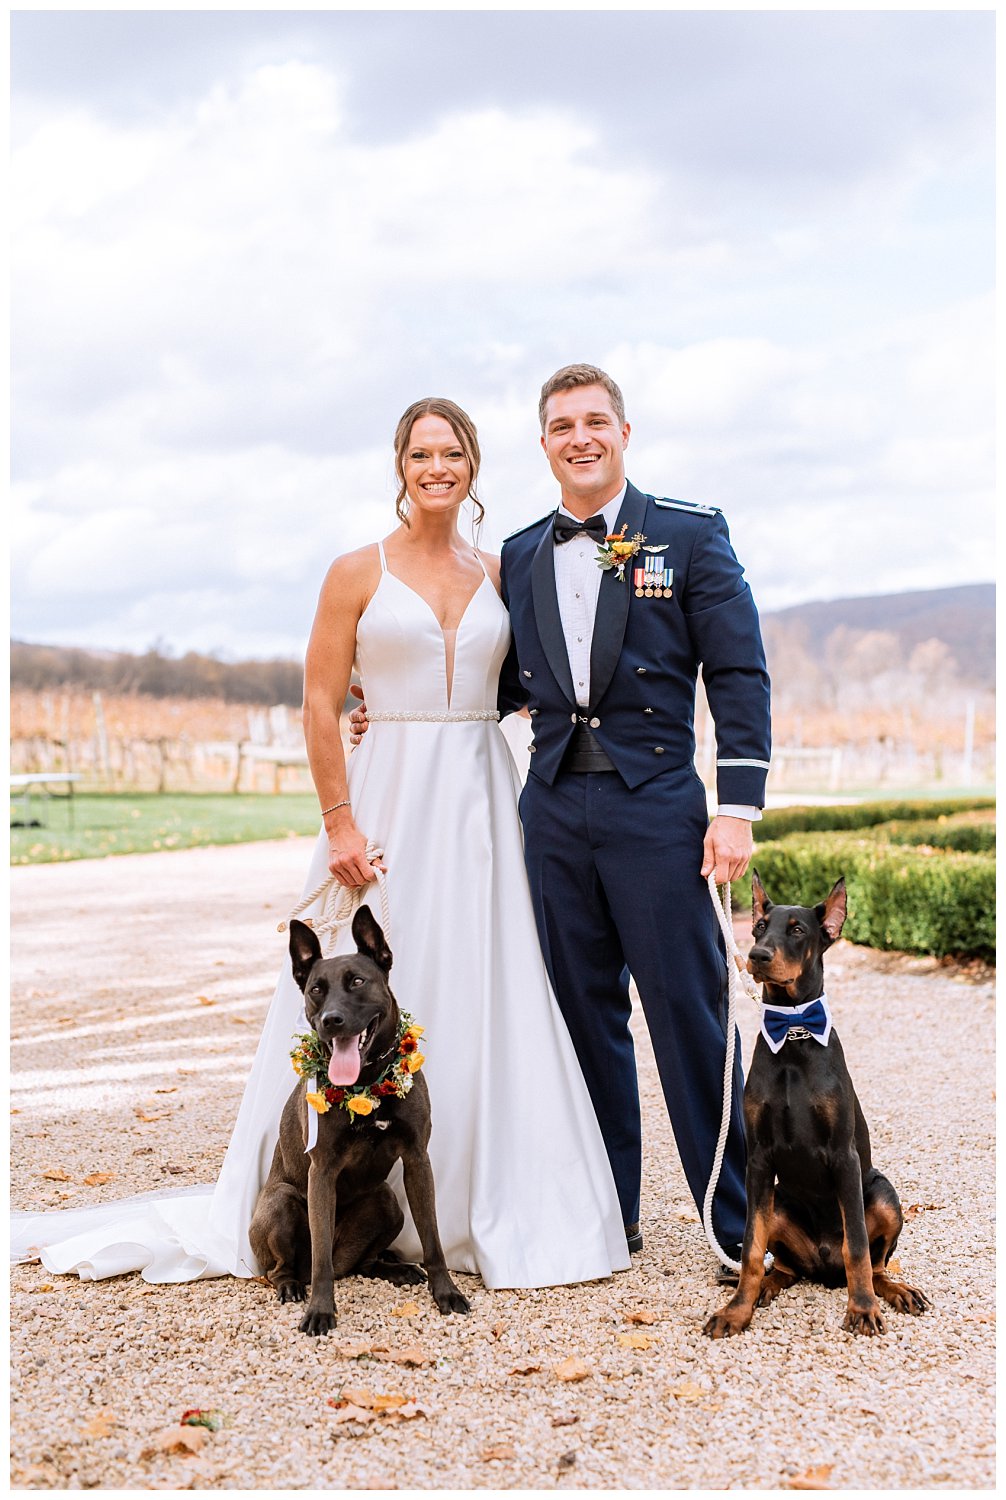 Bride & Groom pose with their dogs at Keswick Vineyard Wedding photographed by Heather Dodge Photography